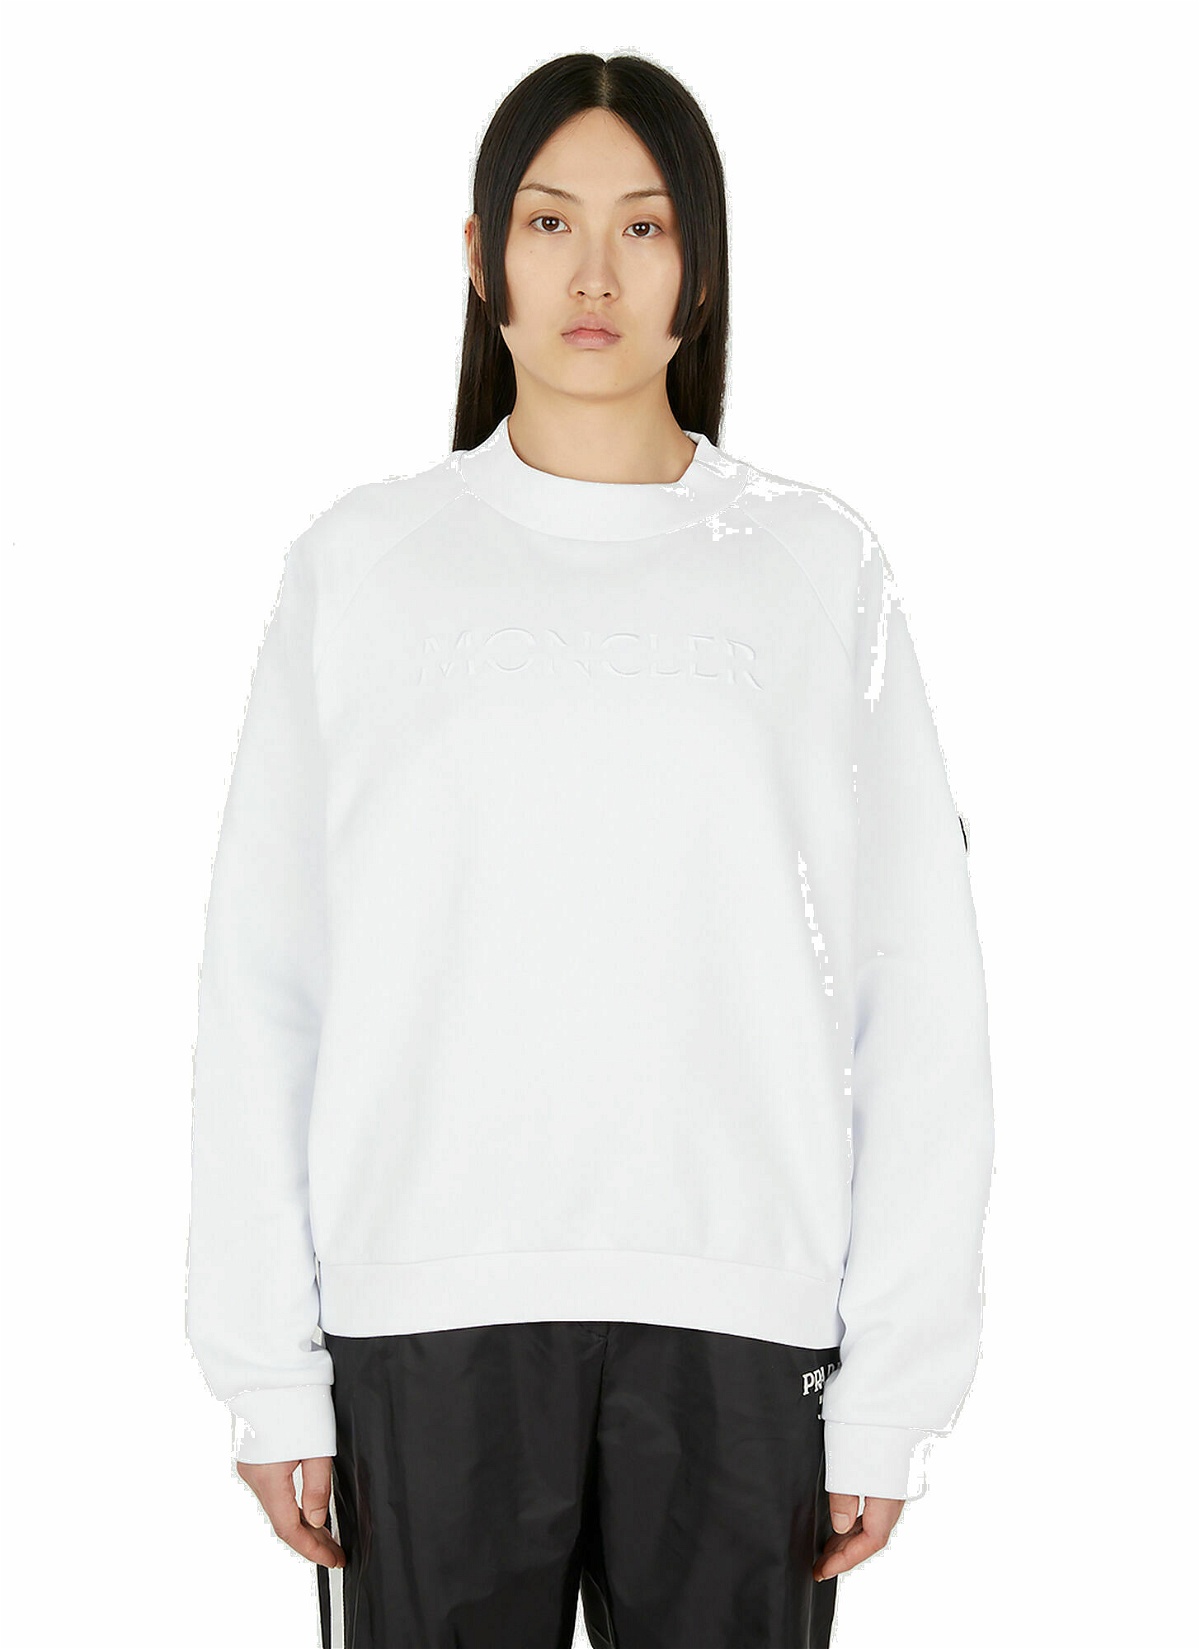 Logo Embroidery Sweatshirt in White Moncler